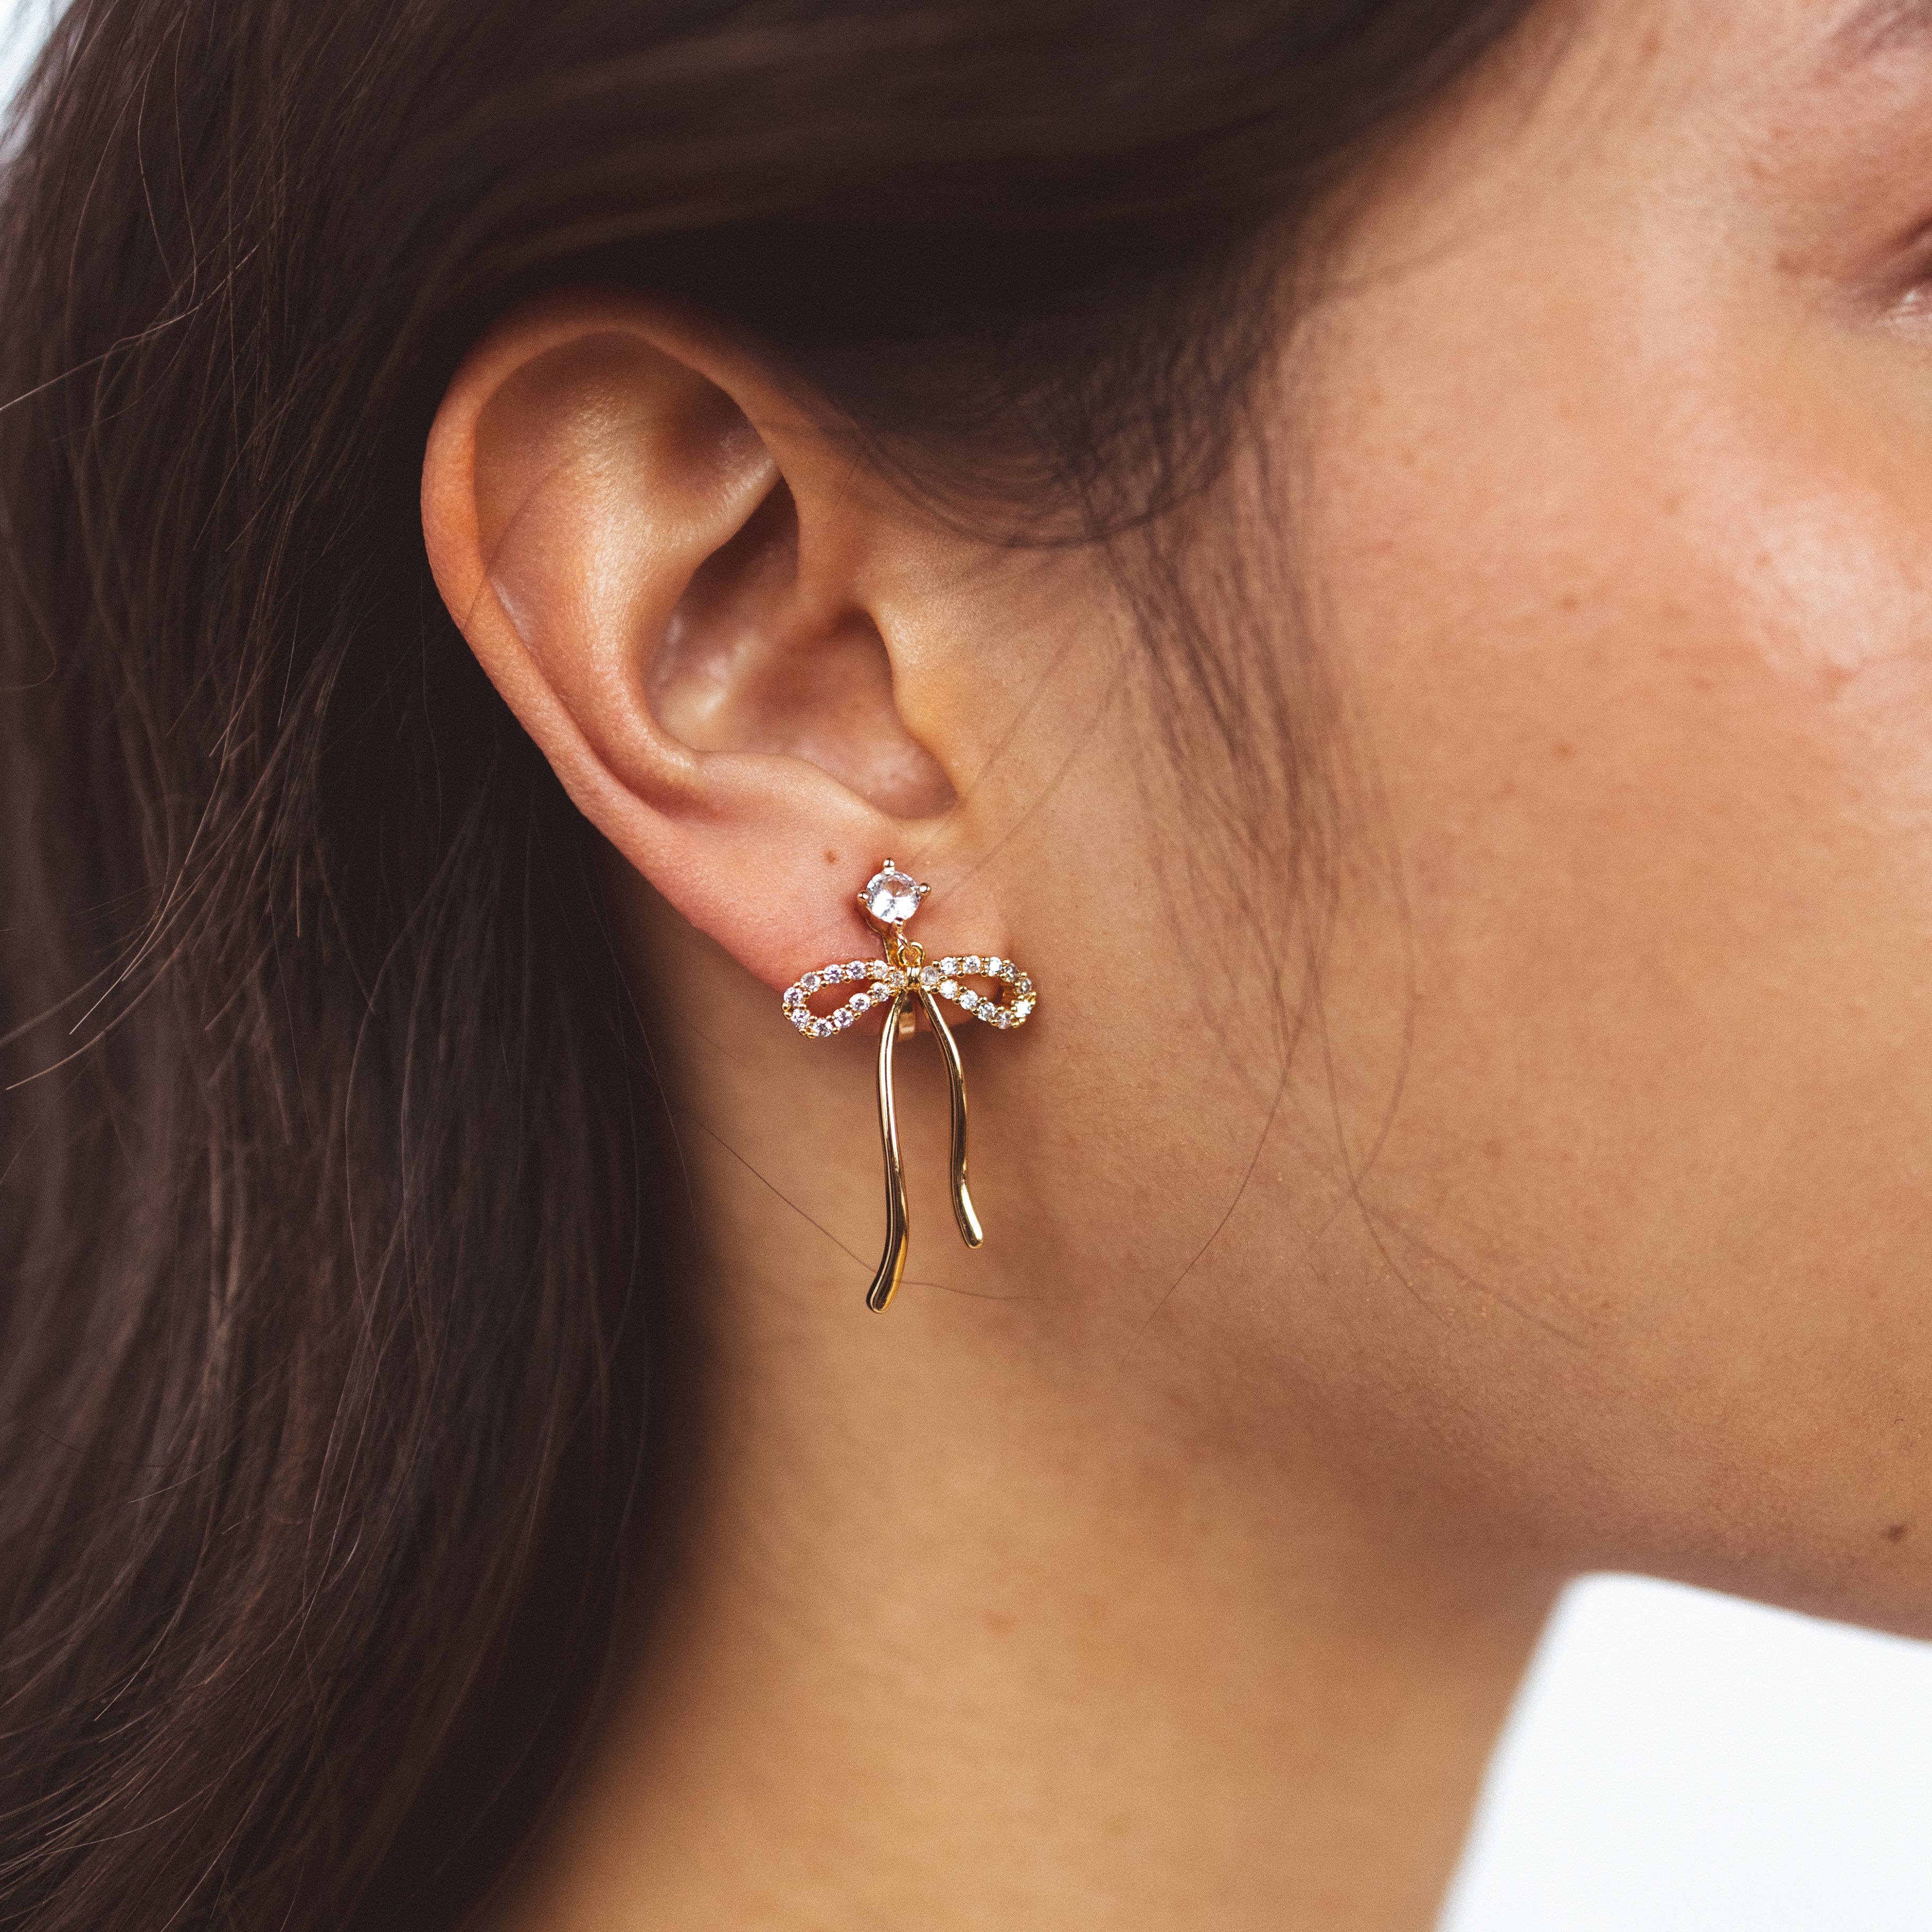 A model wearing the Anna Clip On Earrings, offer an adjustable fit and 24-hour hold for unrivaled comfort. Elevate your style effortlessly with the touch of elegance these earrings provide.